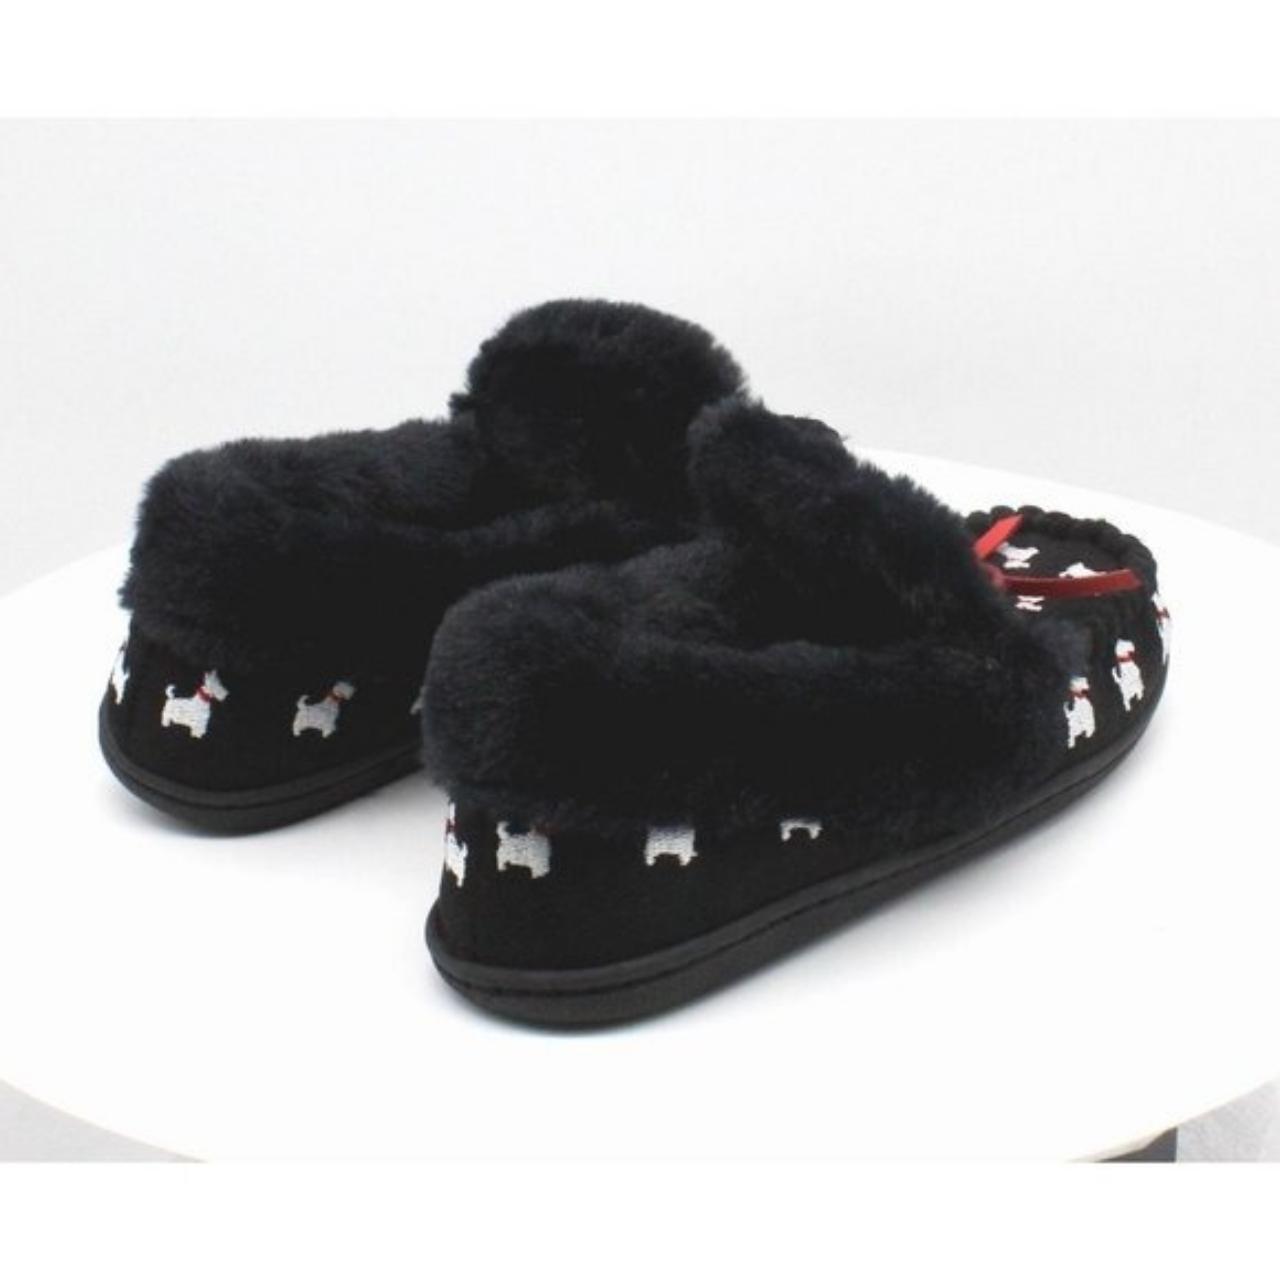 Product Image 3 - Charter Club Dorenda Moccasin Slippers

Help